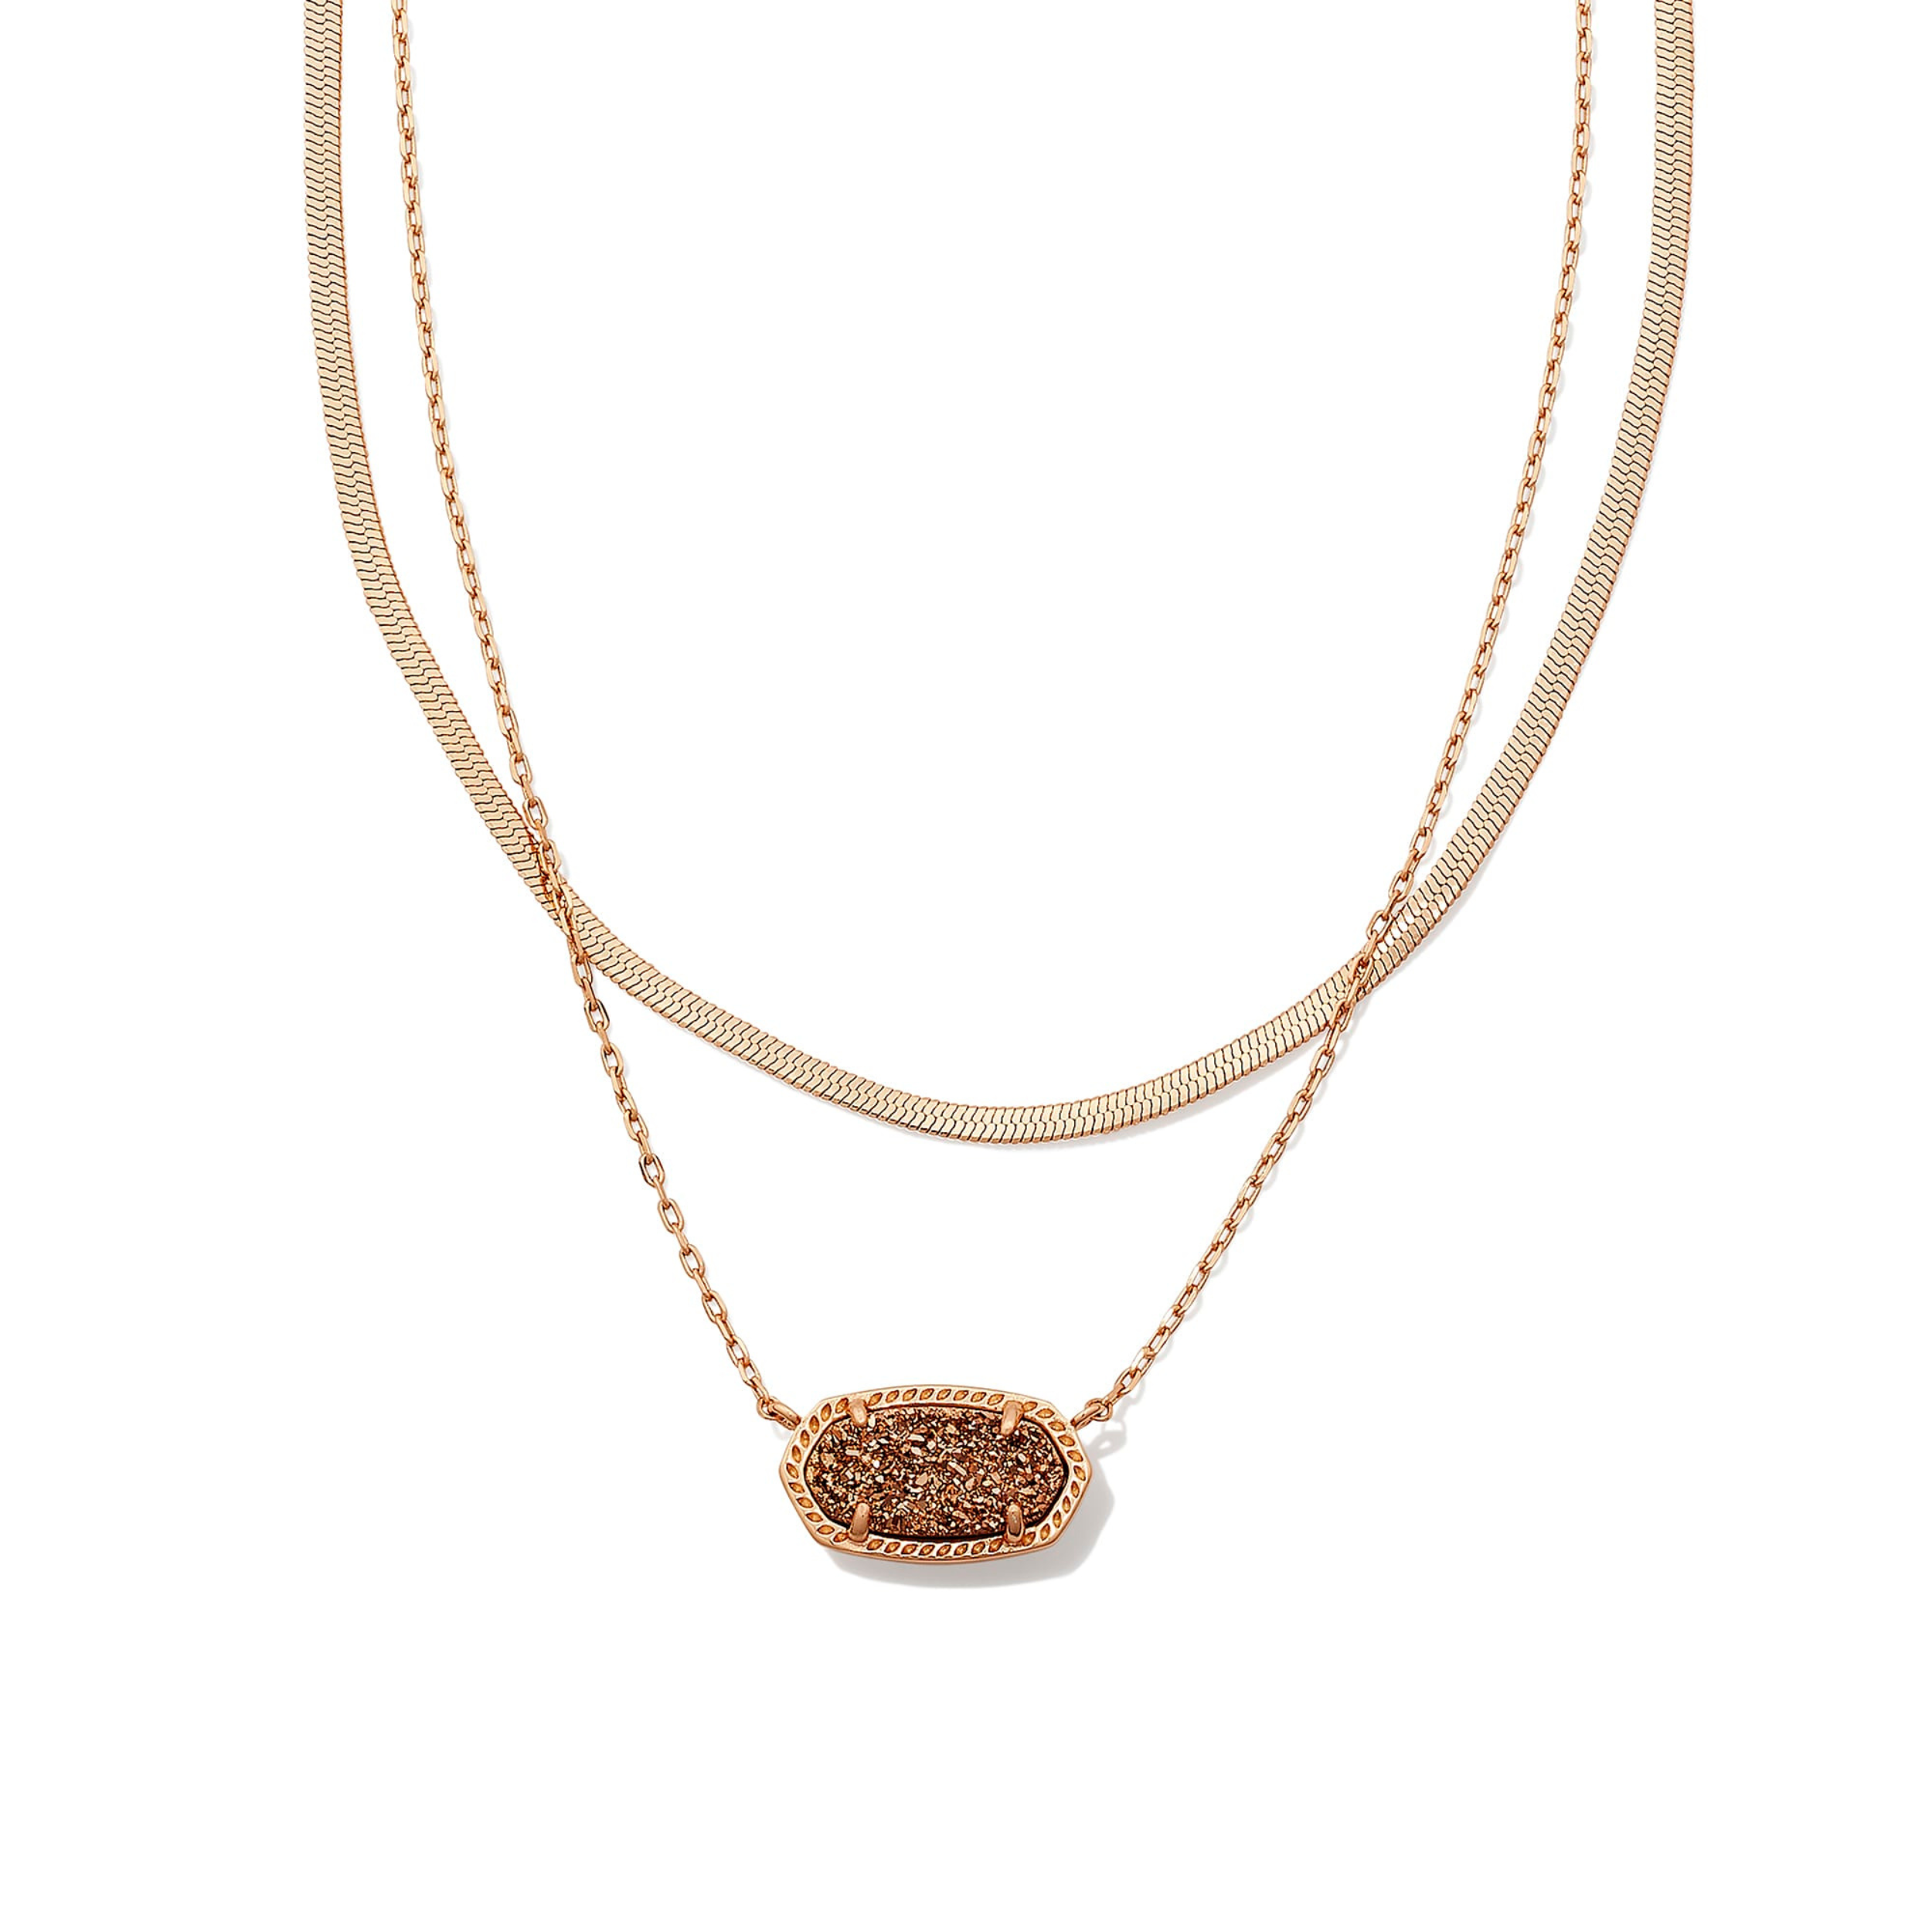 Pictured is a two strand, rose gold chain necklace with an oval rose gold drusy pendant. This necklace is pictured on a white background.    